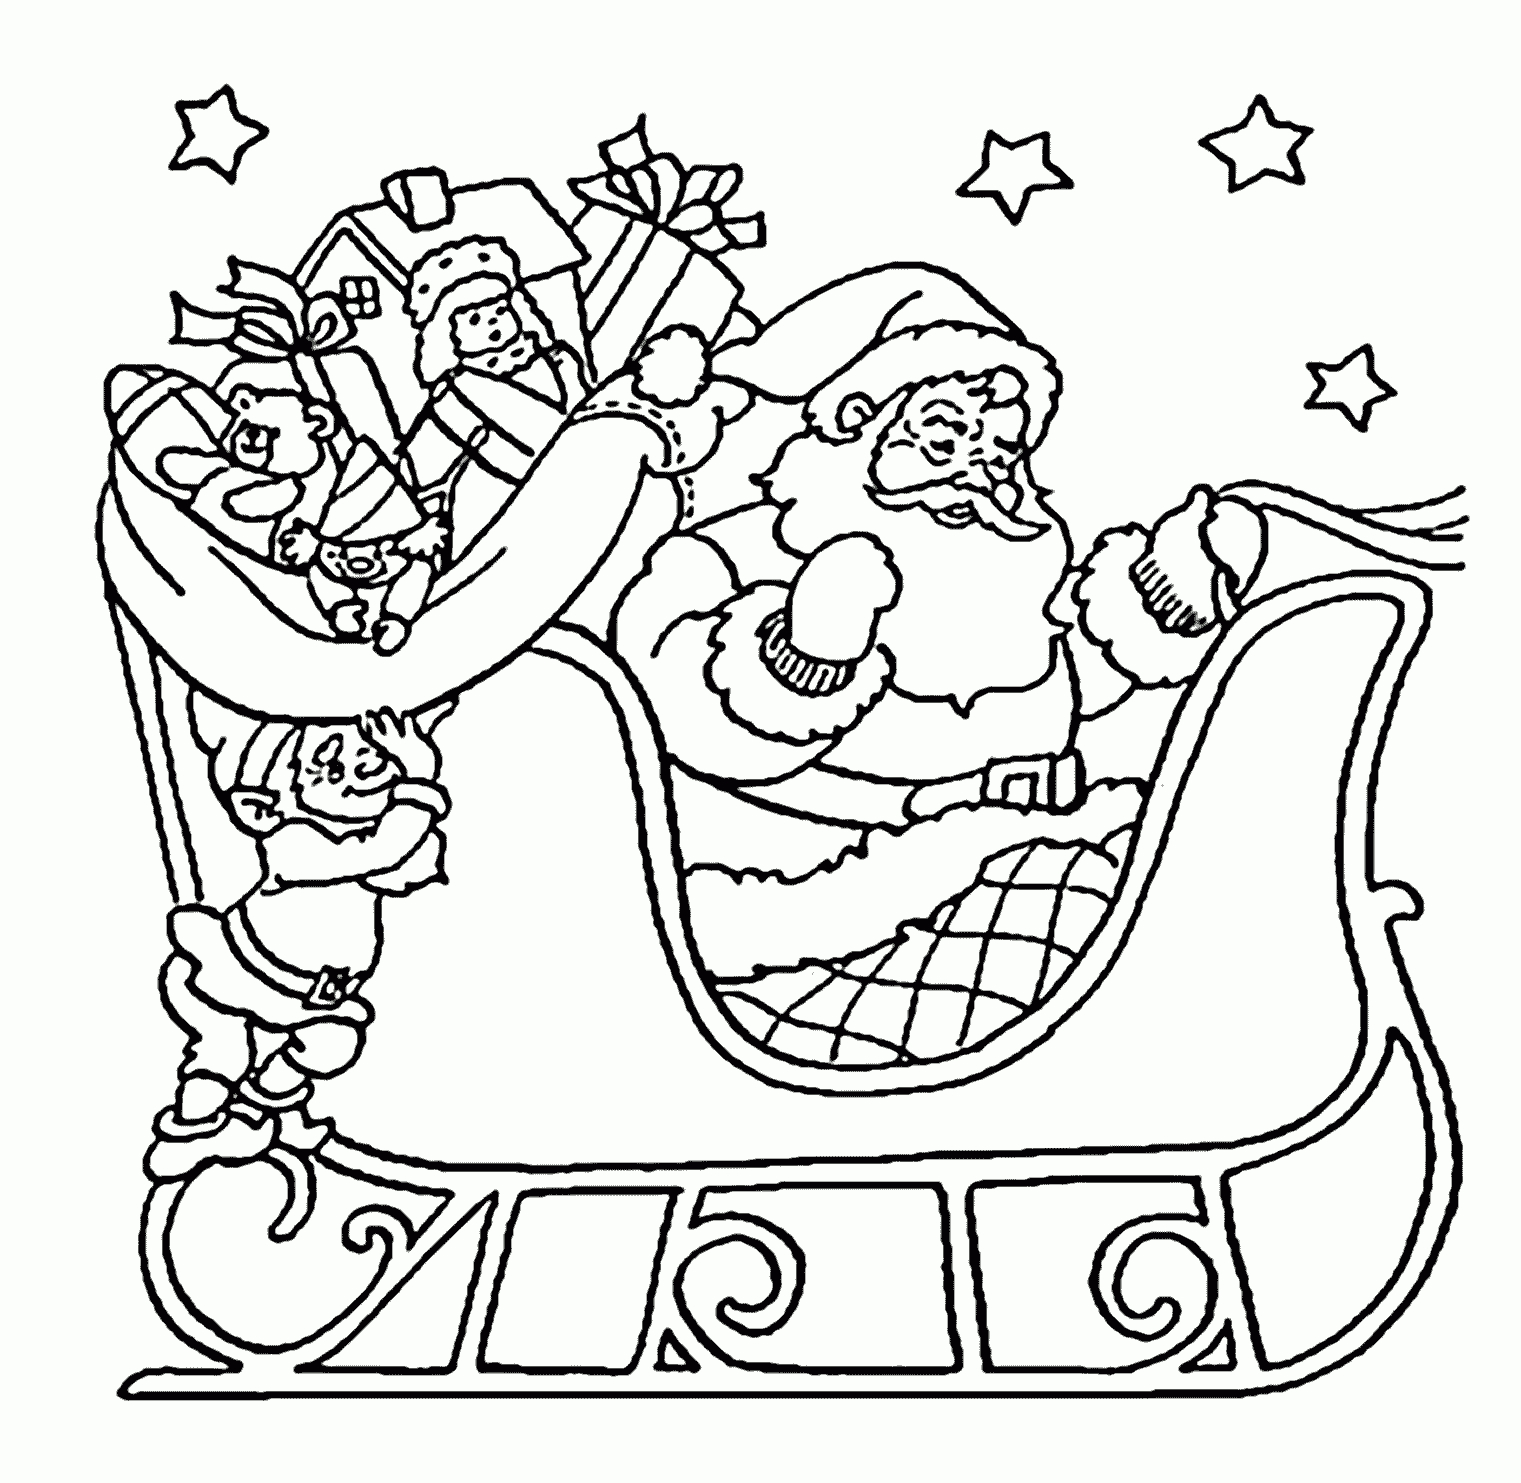 Santa Claus On Sleigh Coloring Pages For Kids, Printable Free - Santa Coloring Pages Printable Free